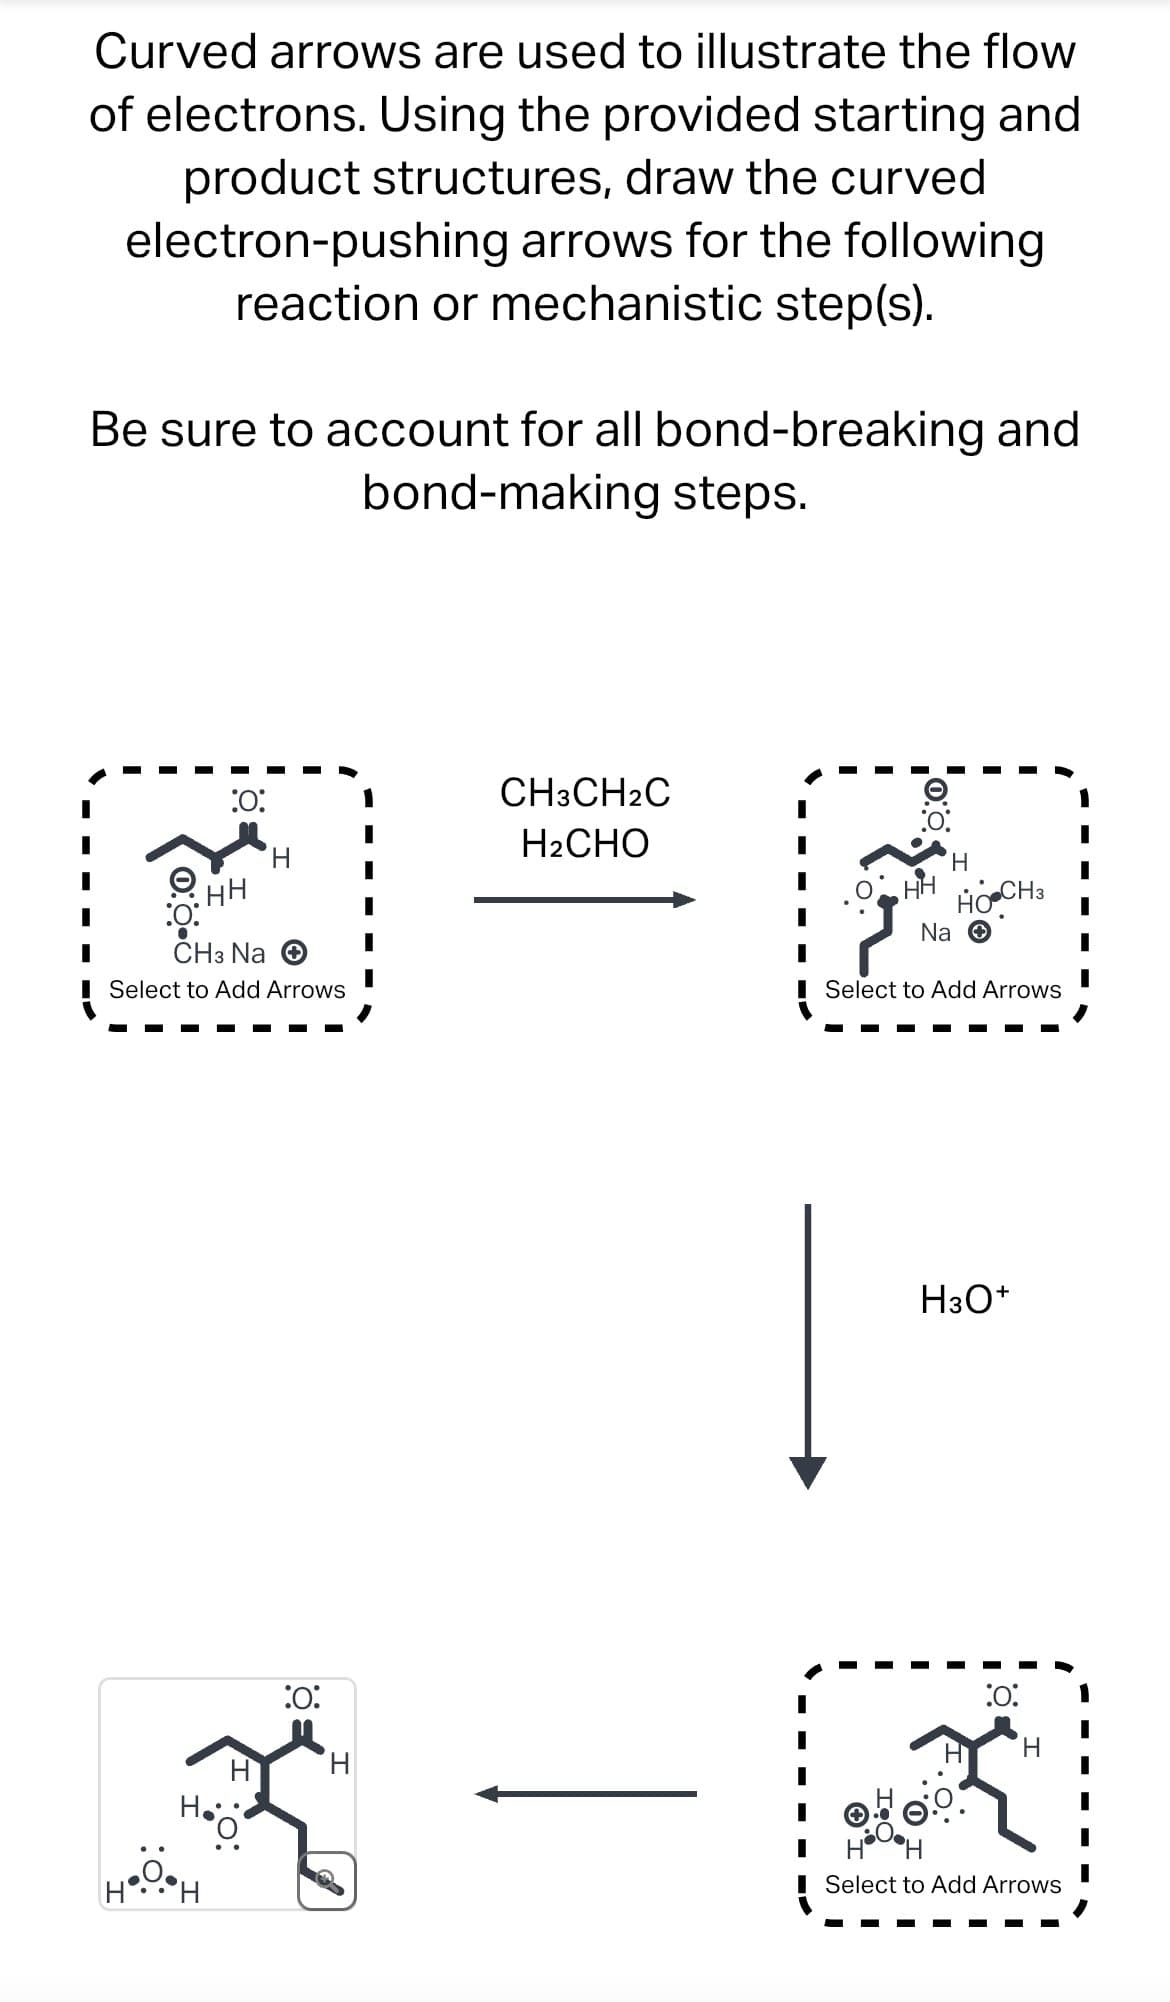 Curved arrows are used to illustrate the flow
of electrons. Using the provided starting and
product structures, draw the curved
electron-pushing arrows for the following
reaction or mechanistic step(s).
Be sure to account for all bond-breaking and
bond-making steps.
:0:
CH3CH2C
H2CHO
:0:
HH
CH3 Na
Select to Add Arrows
надон
:0:
H
H
HH
H
HO CH3
Na ✪
Select to Add Arrows
H3O+
:0:
H
Select to Add Arrows